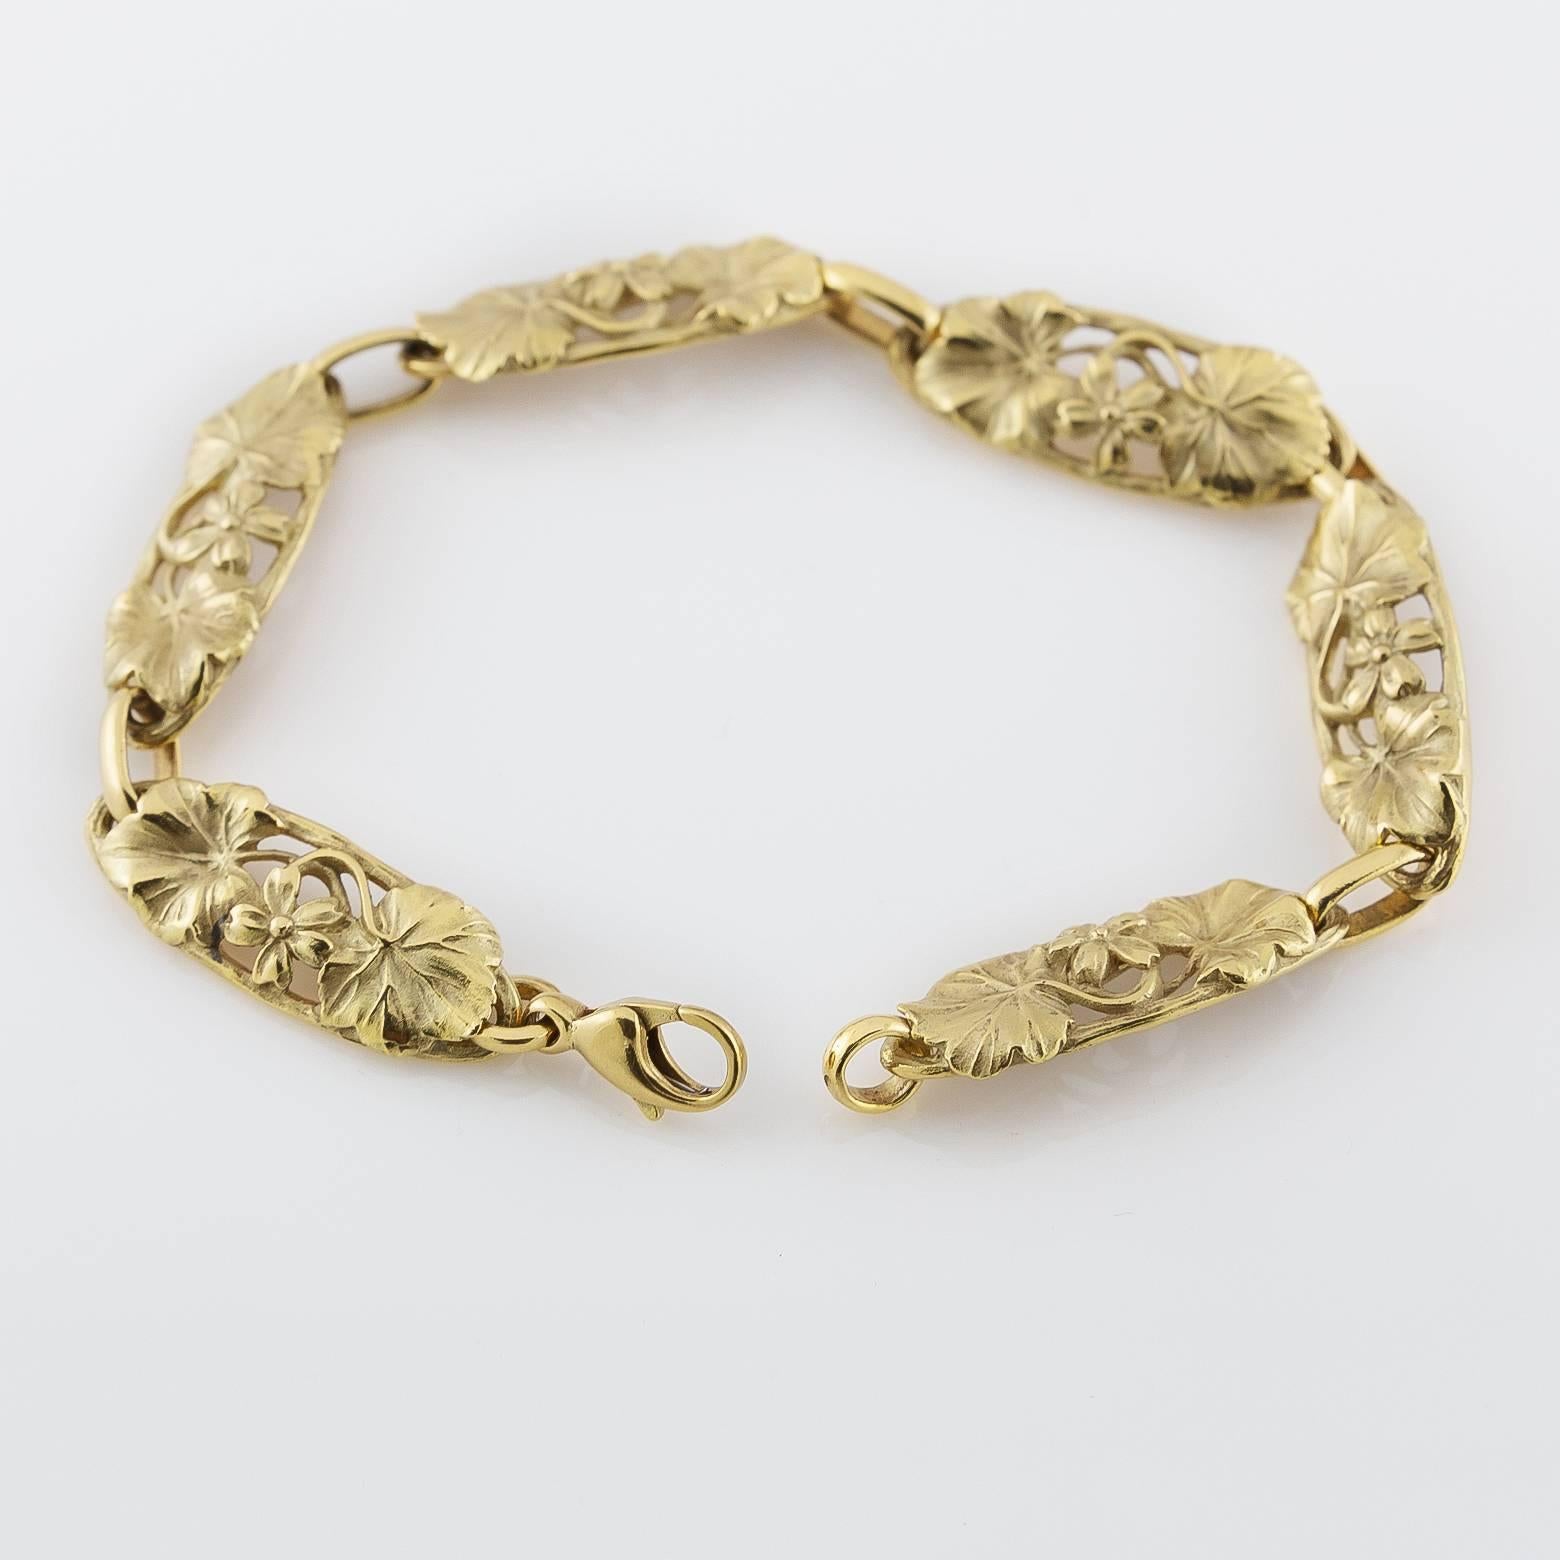 Arnould Art Nouveau 18K Gold Link Bracelet Re-Edition with Flowers and Vines In Excellent Condition For Sale In Berkeley, CA